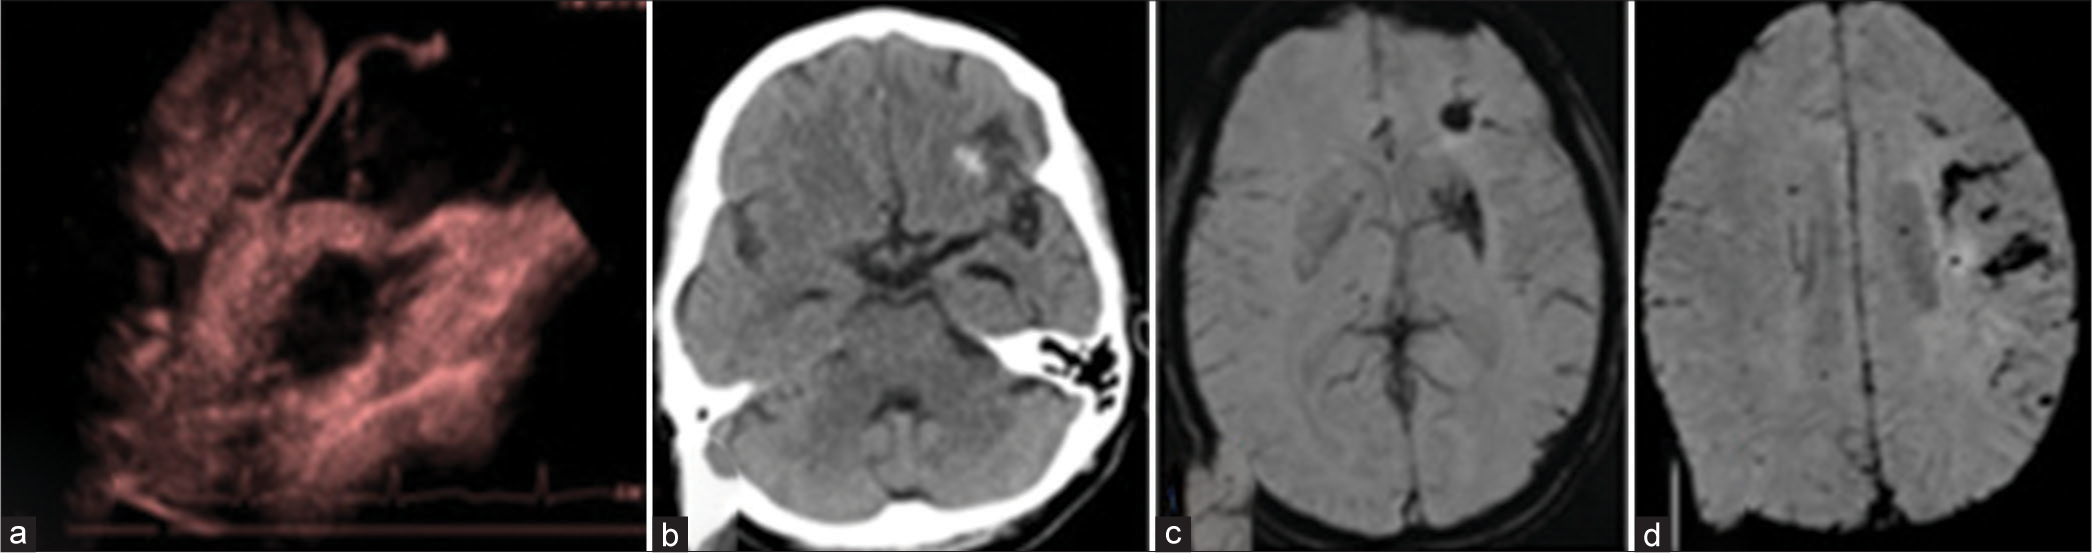 (a) Cardiac Doppler shows large left atrial myxoma. (b) Computed tomography, and (c and d) magnetic resonance imaging performed for the same patient with complaints of acute severe headache shows acute left frontal bleed with the left frontal subarachnoid hemorrhage.